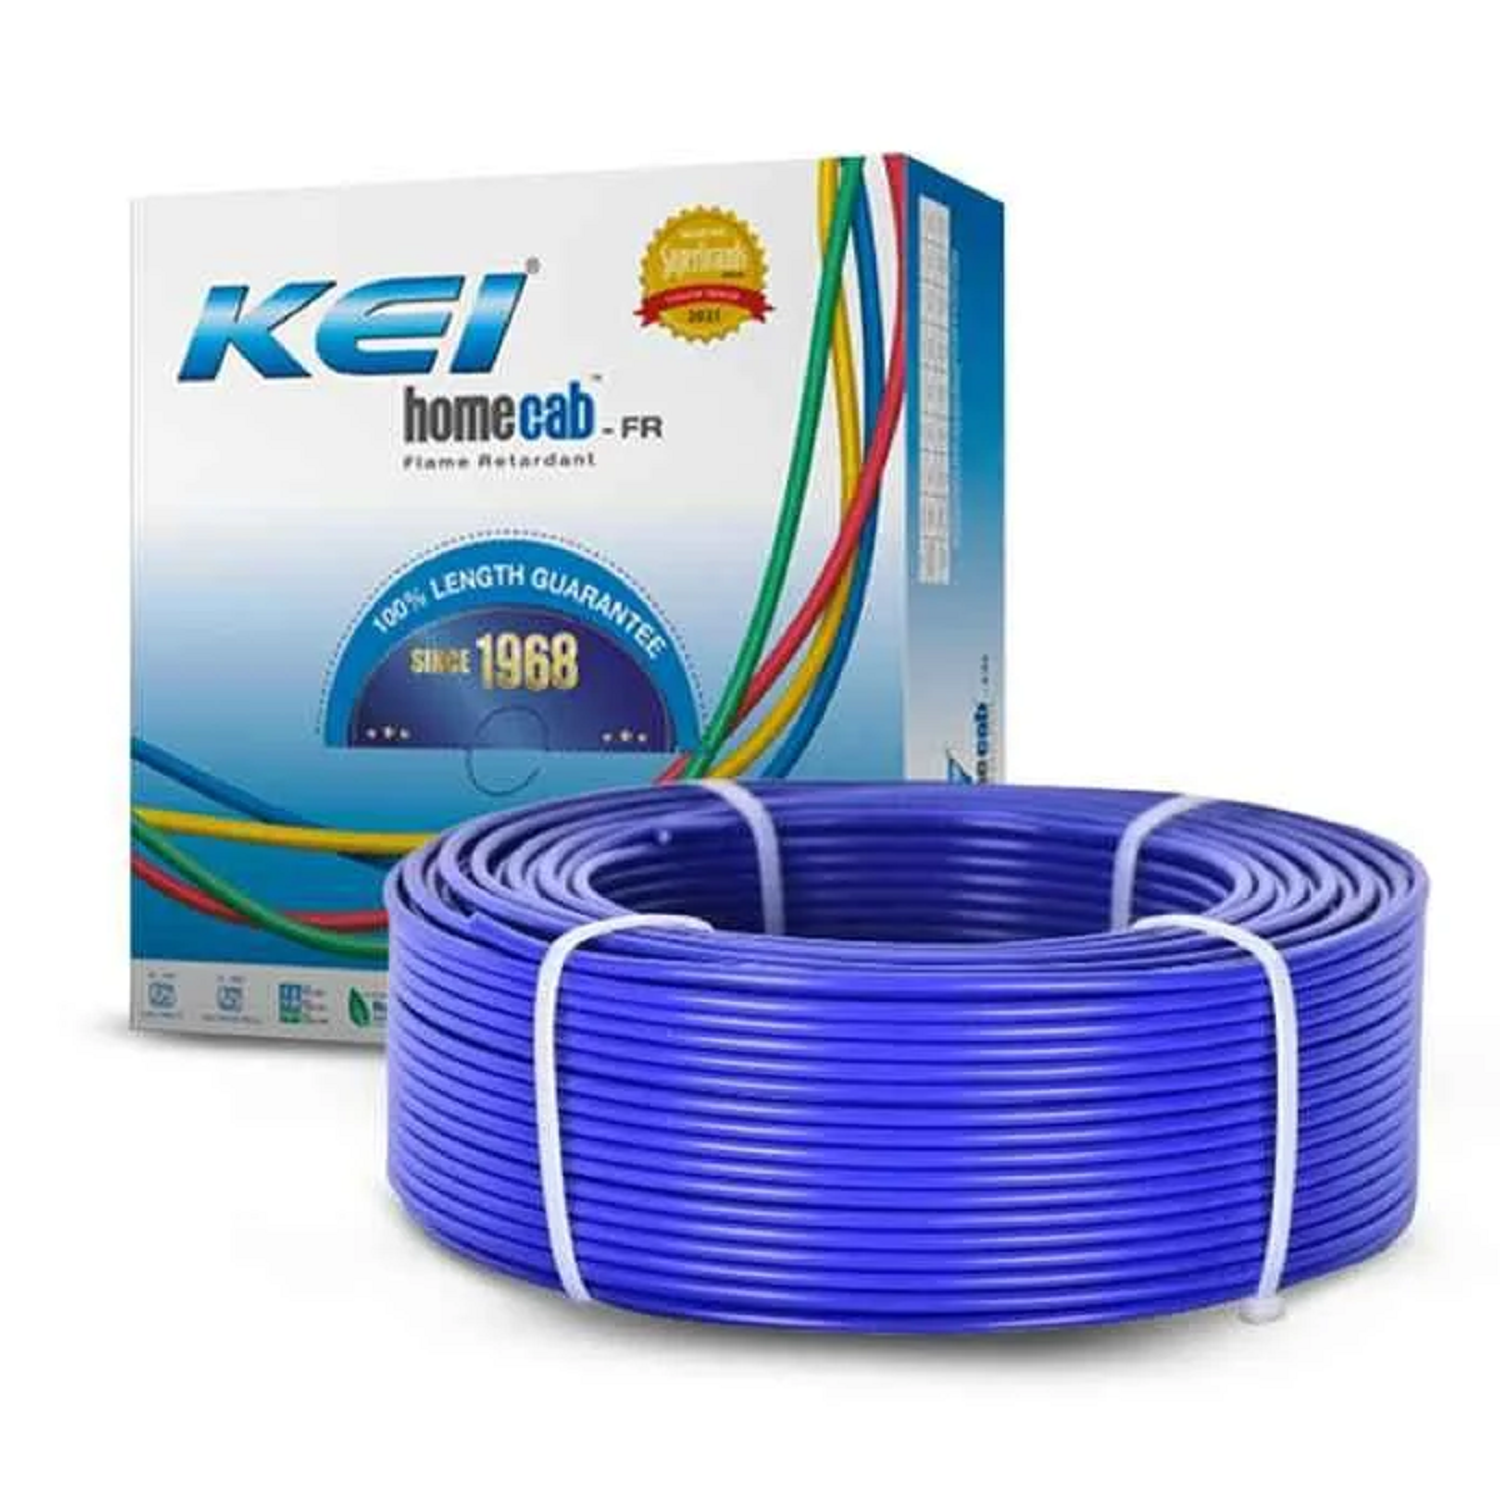 1.5 Sqmm KEI FR Single Core Copper Wire (90 Mtr) With PVC Insulated for House & Industrial Uses (Blu